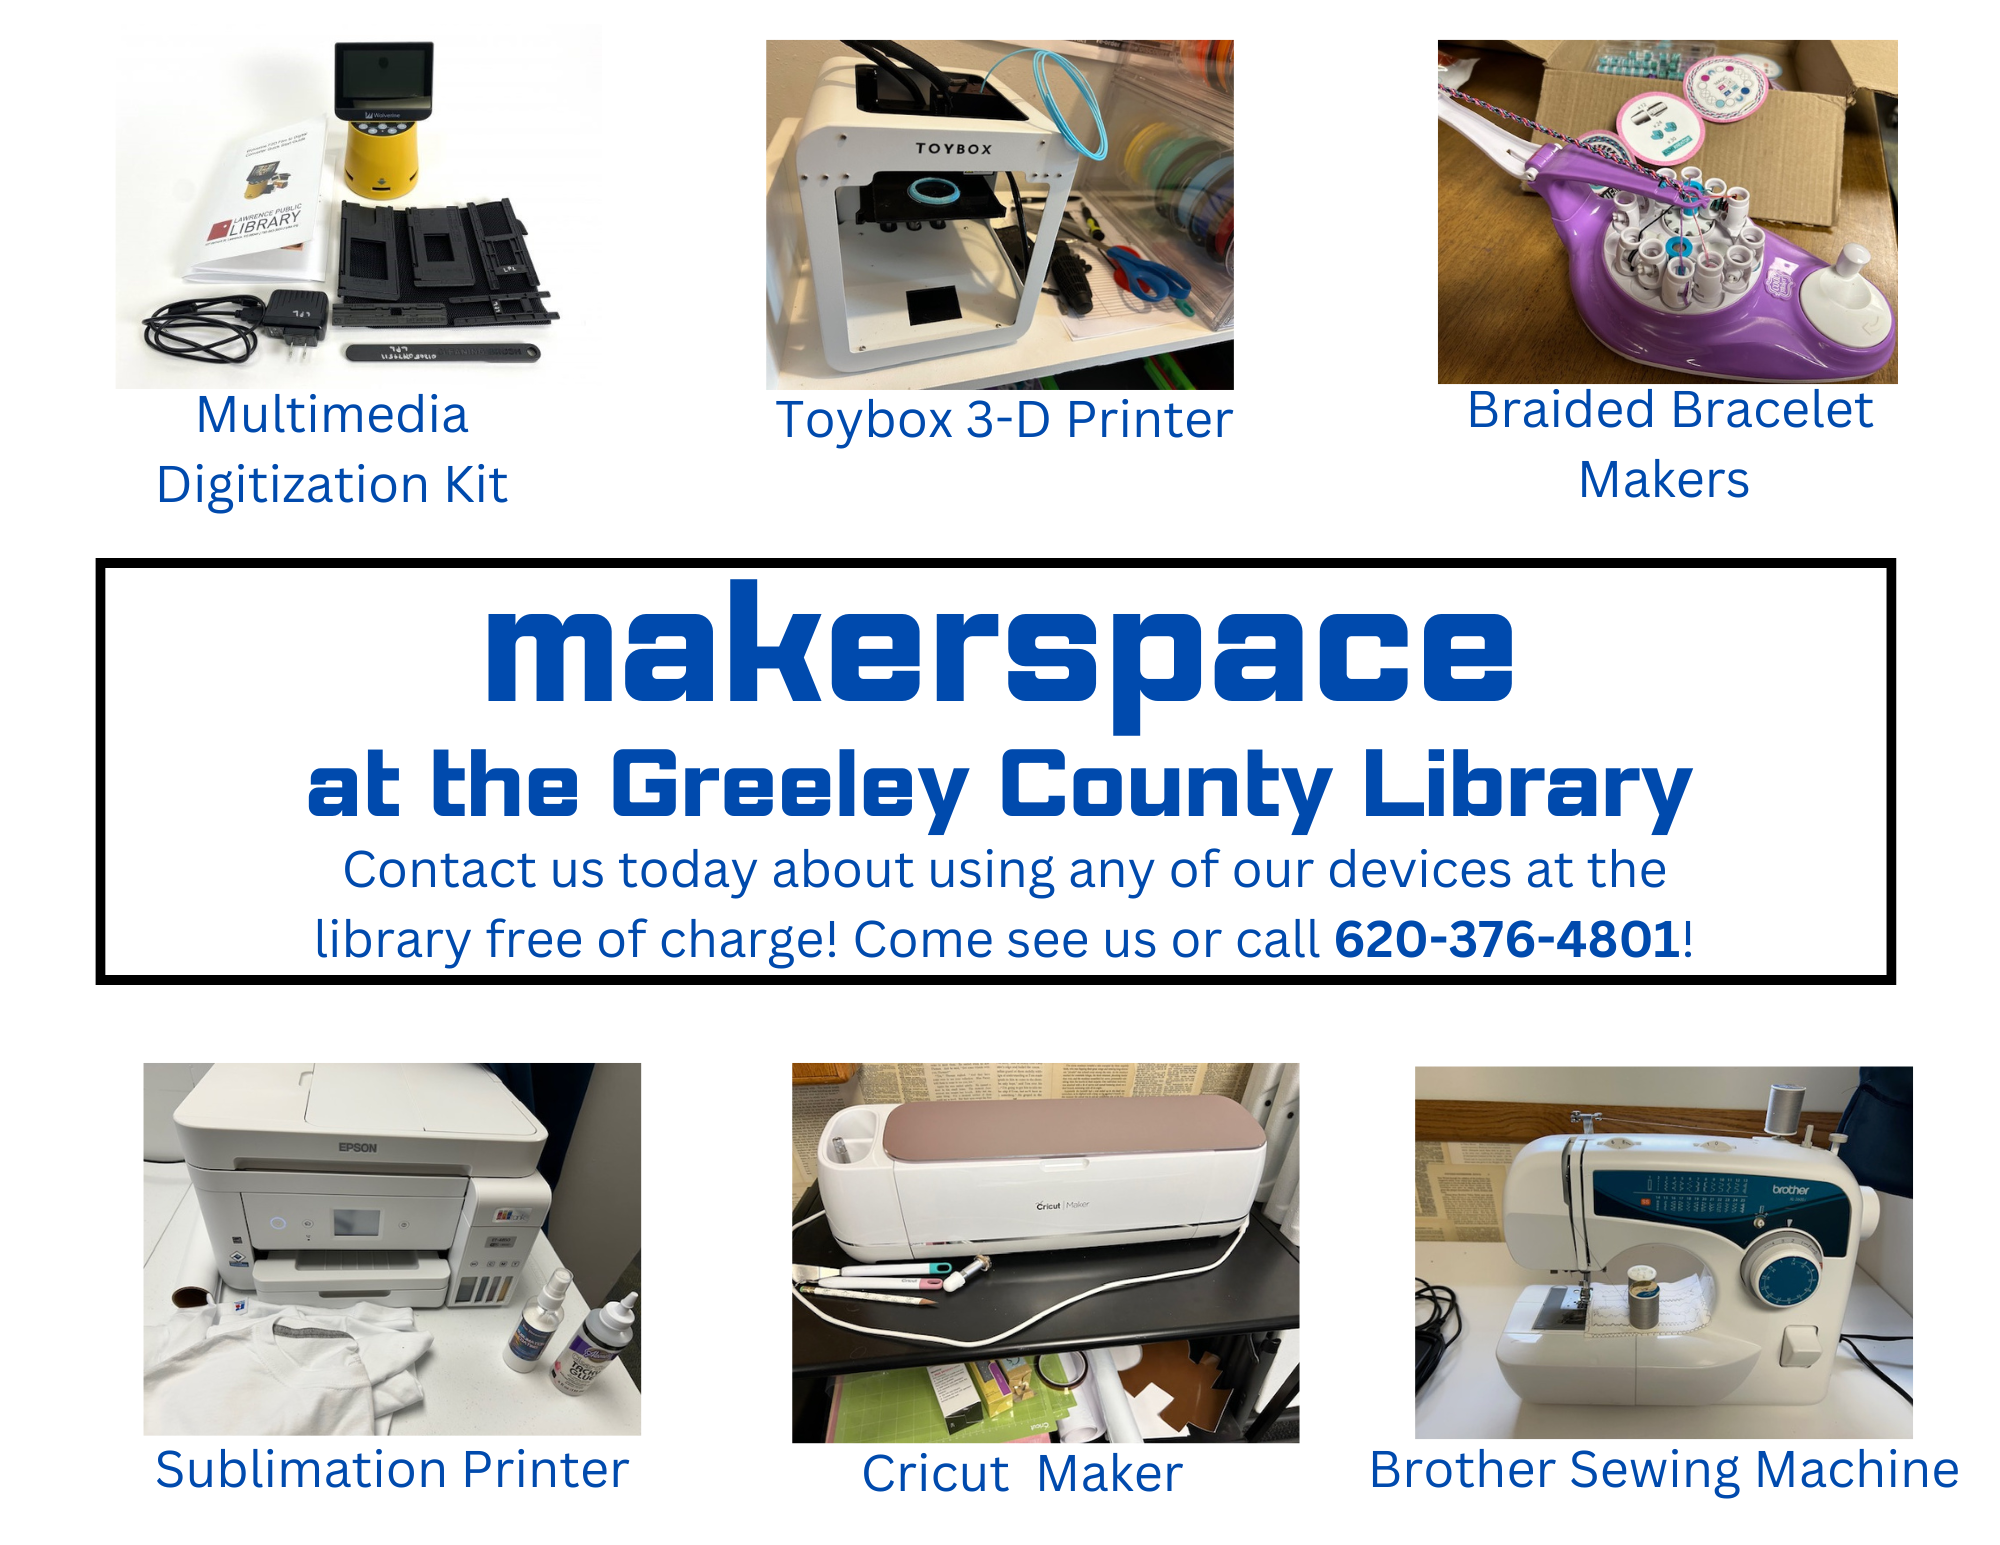 Images of various devices available for use in the Makerspace at the Greeley County Library.